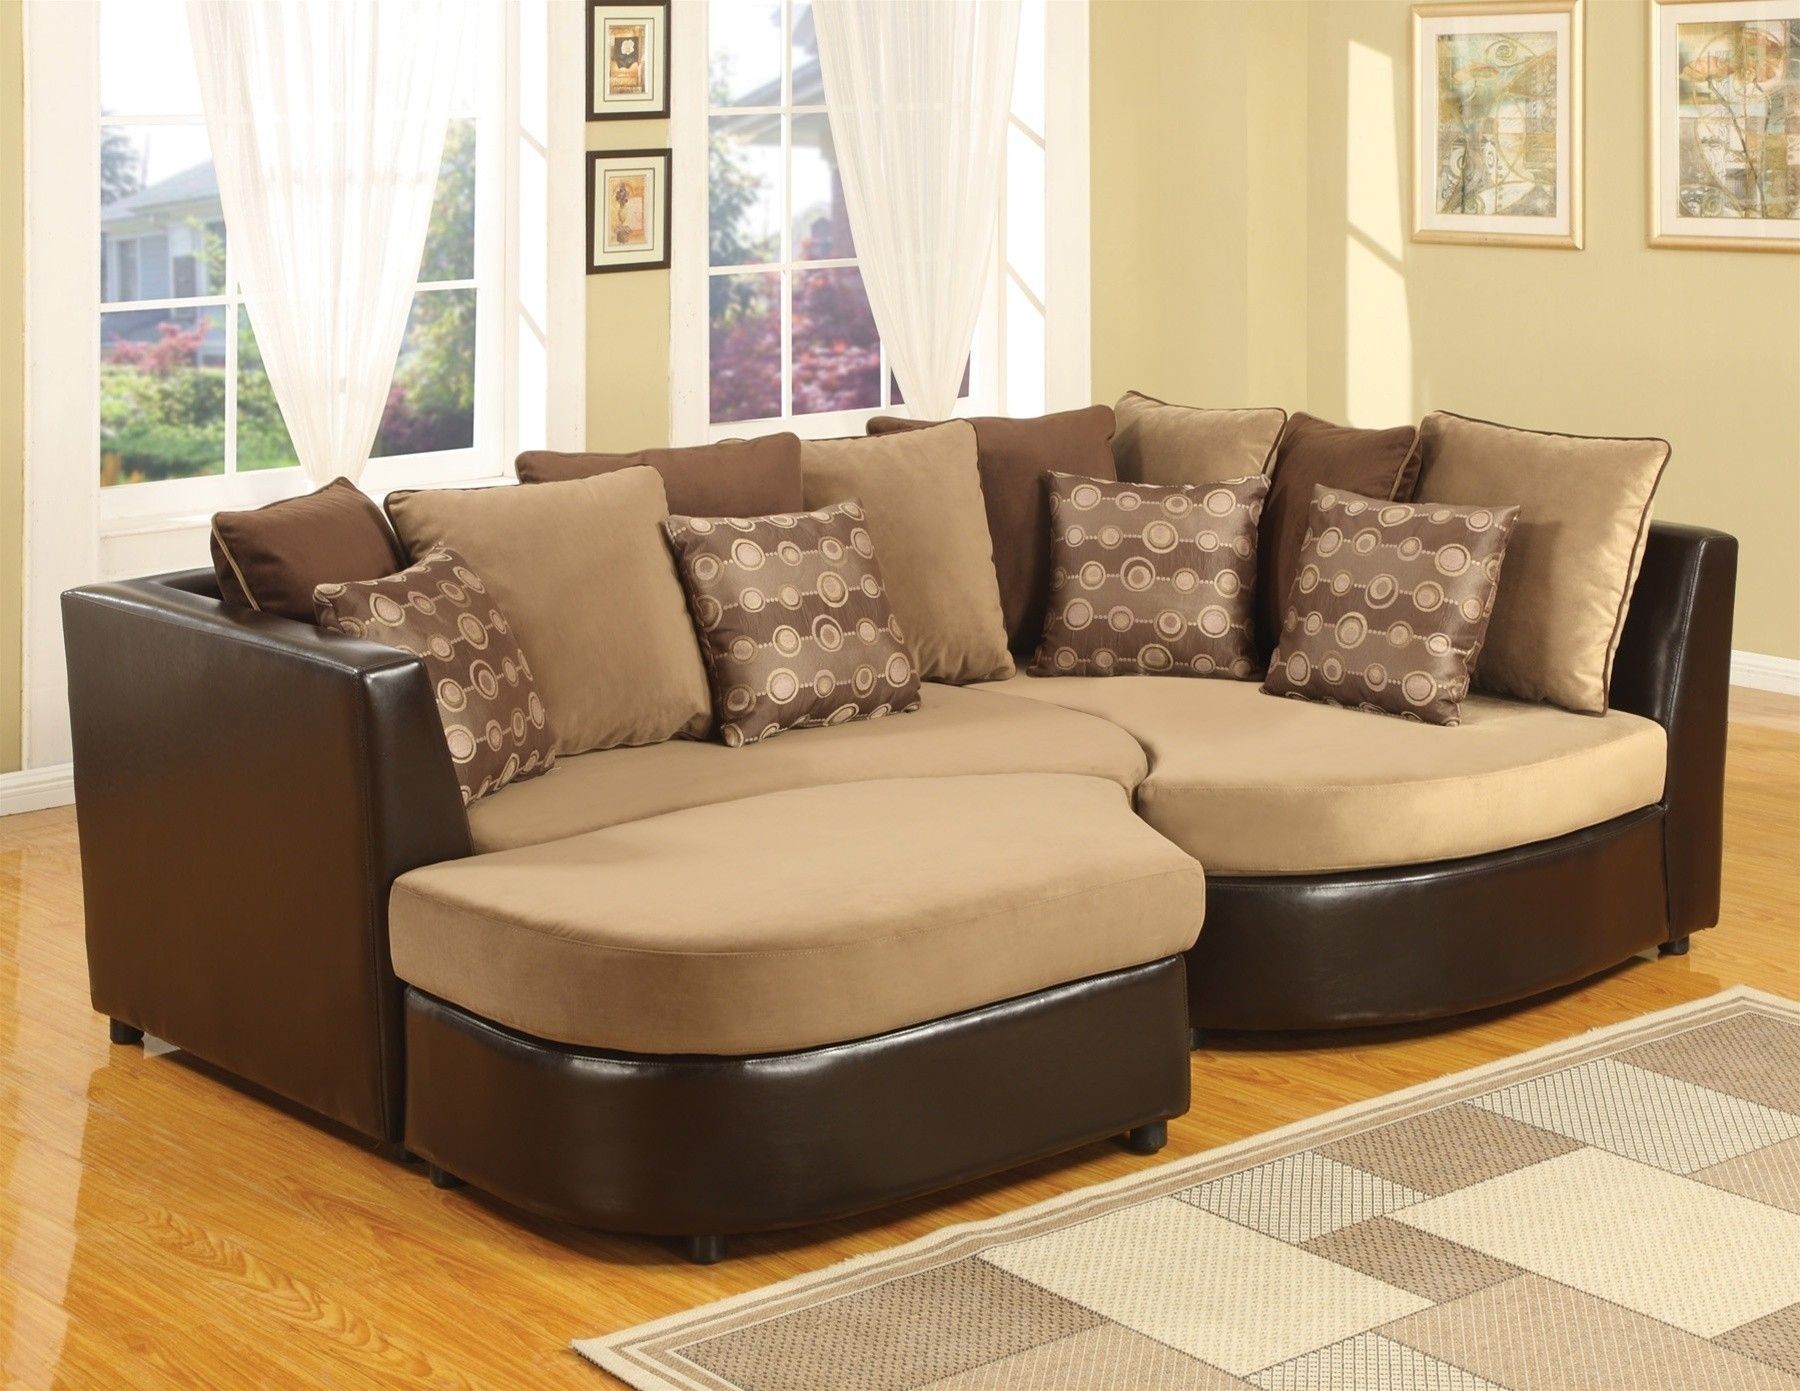 4 Piece Sectional Puzzle Sofa | Http://ml2r | Pinterest | House Intended For Macon Ga Sectional Sofas (View 2 of 10)